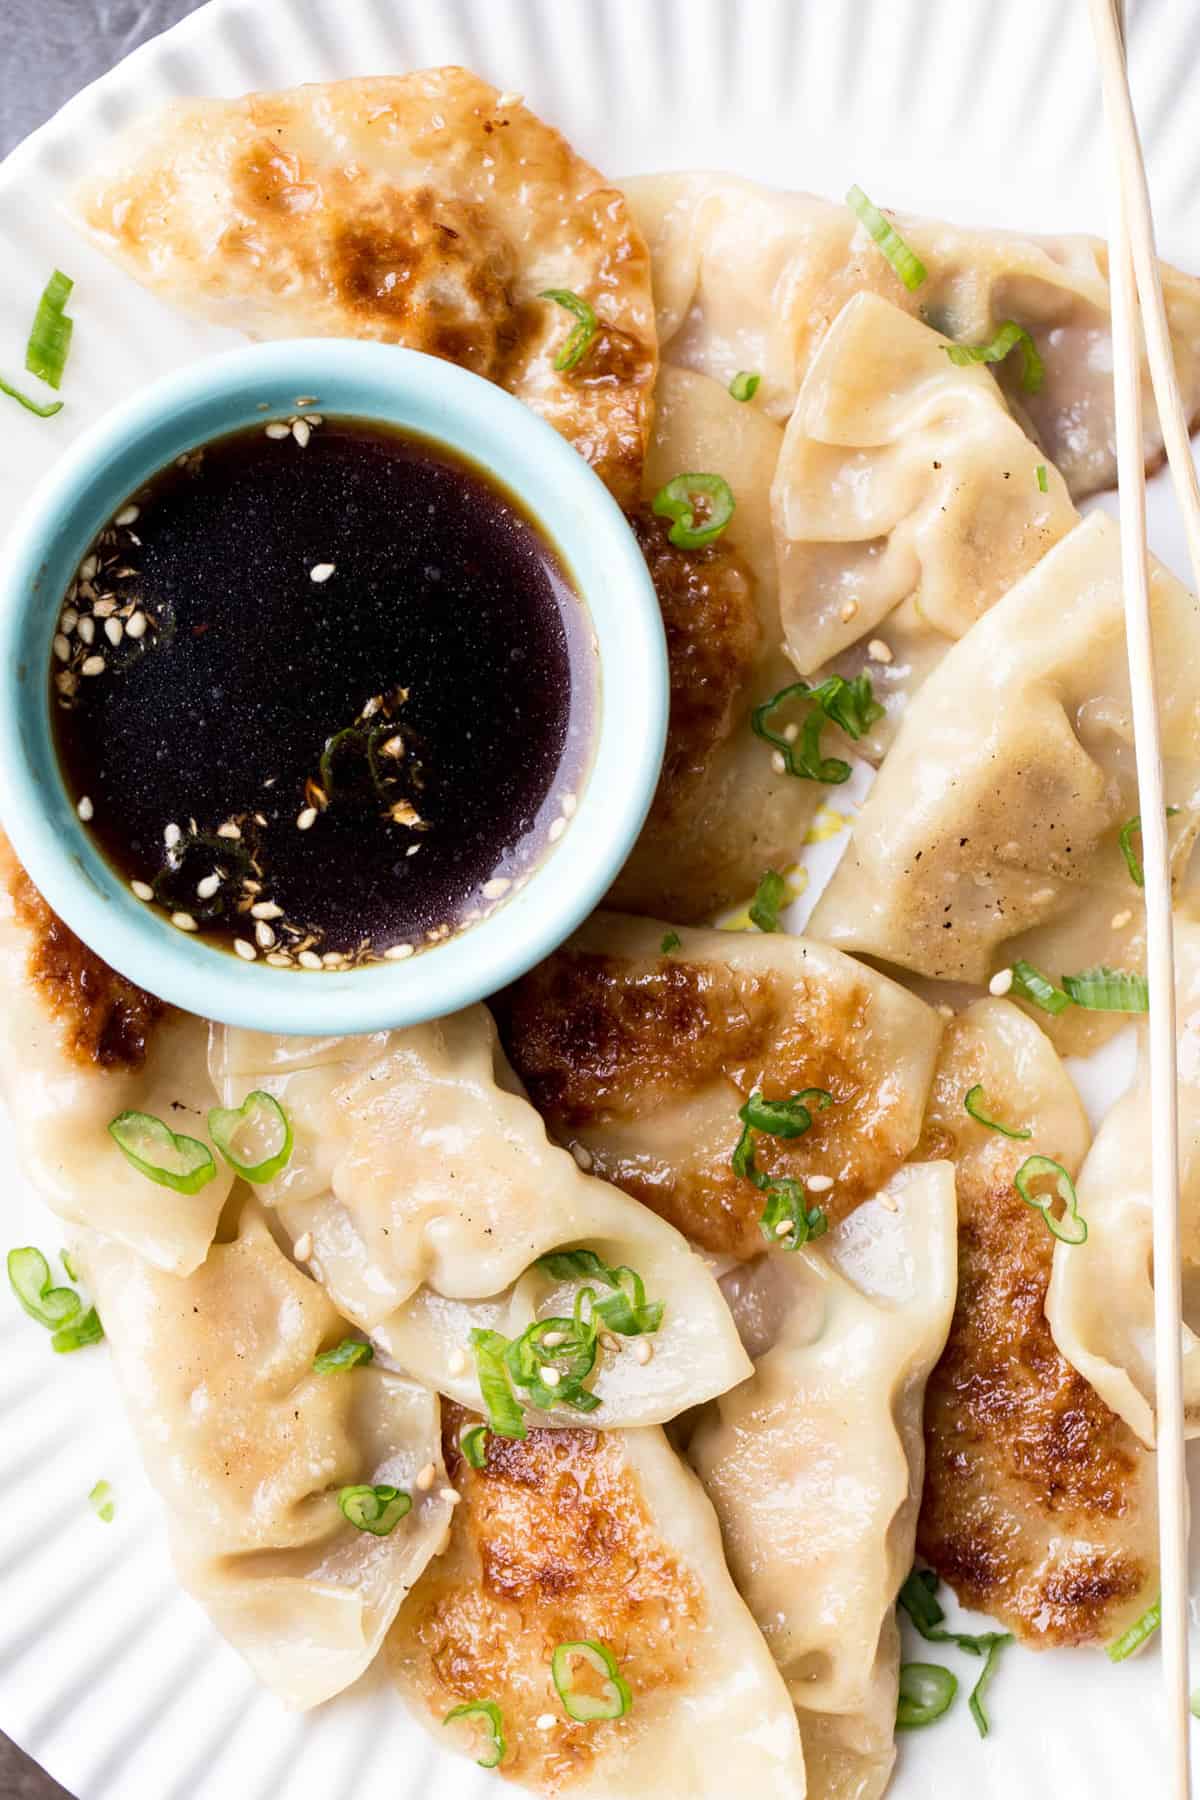 Chicken gyoza recipe on a plate topped with greens and next to a bowl of gyoza sauce.